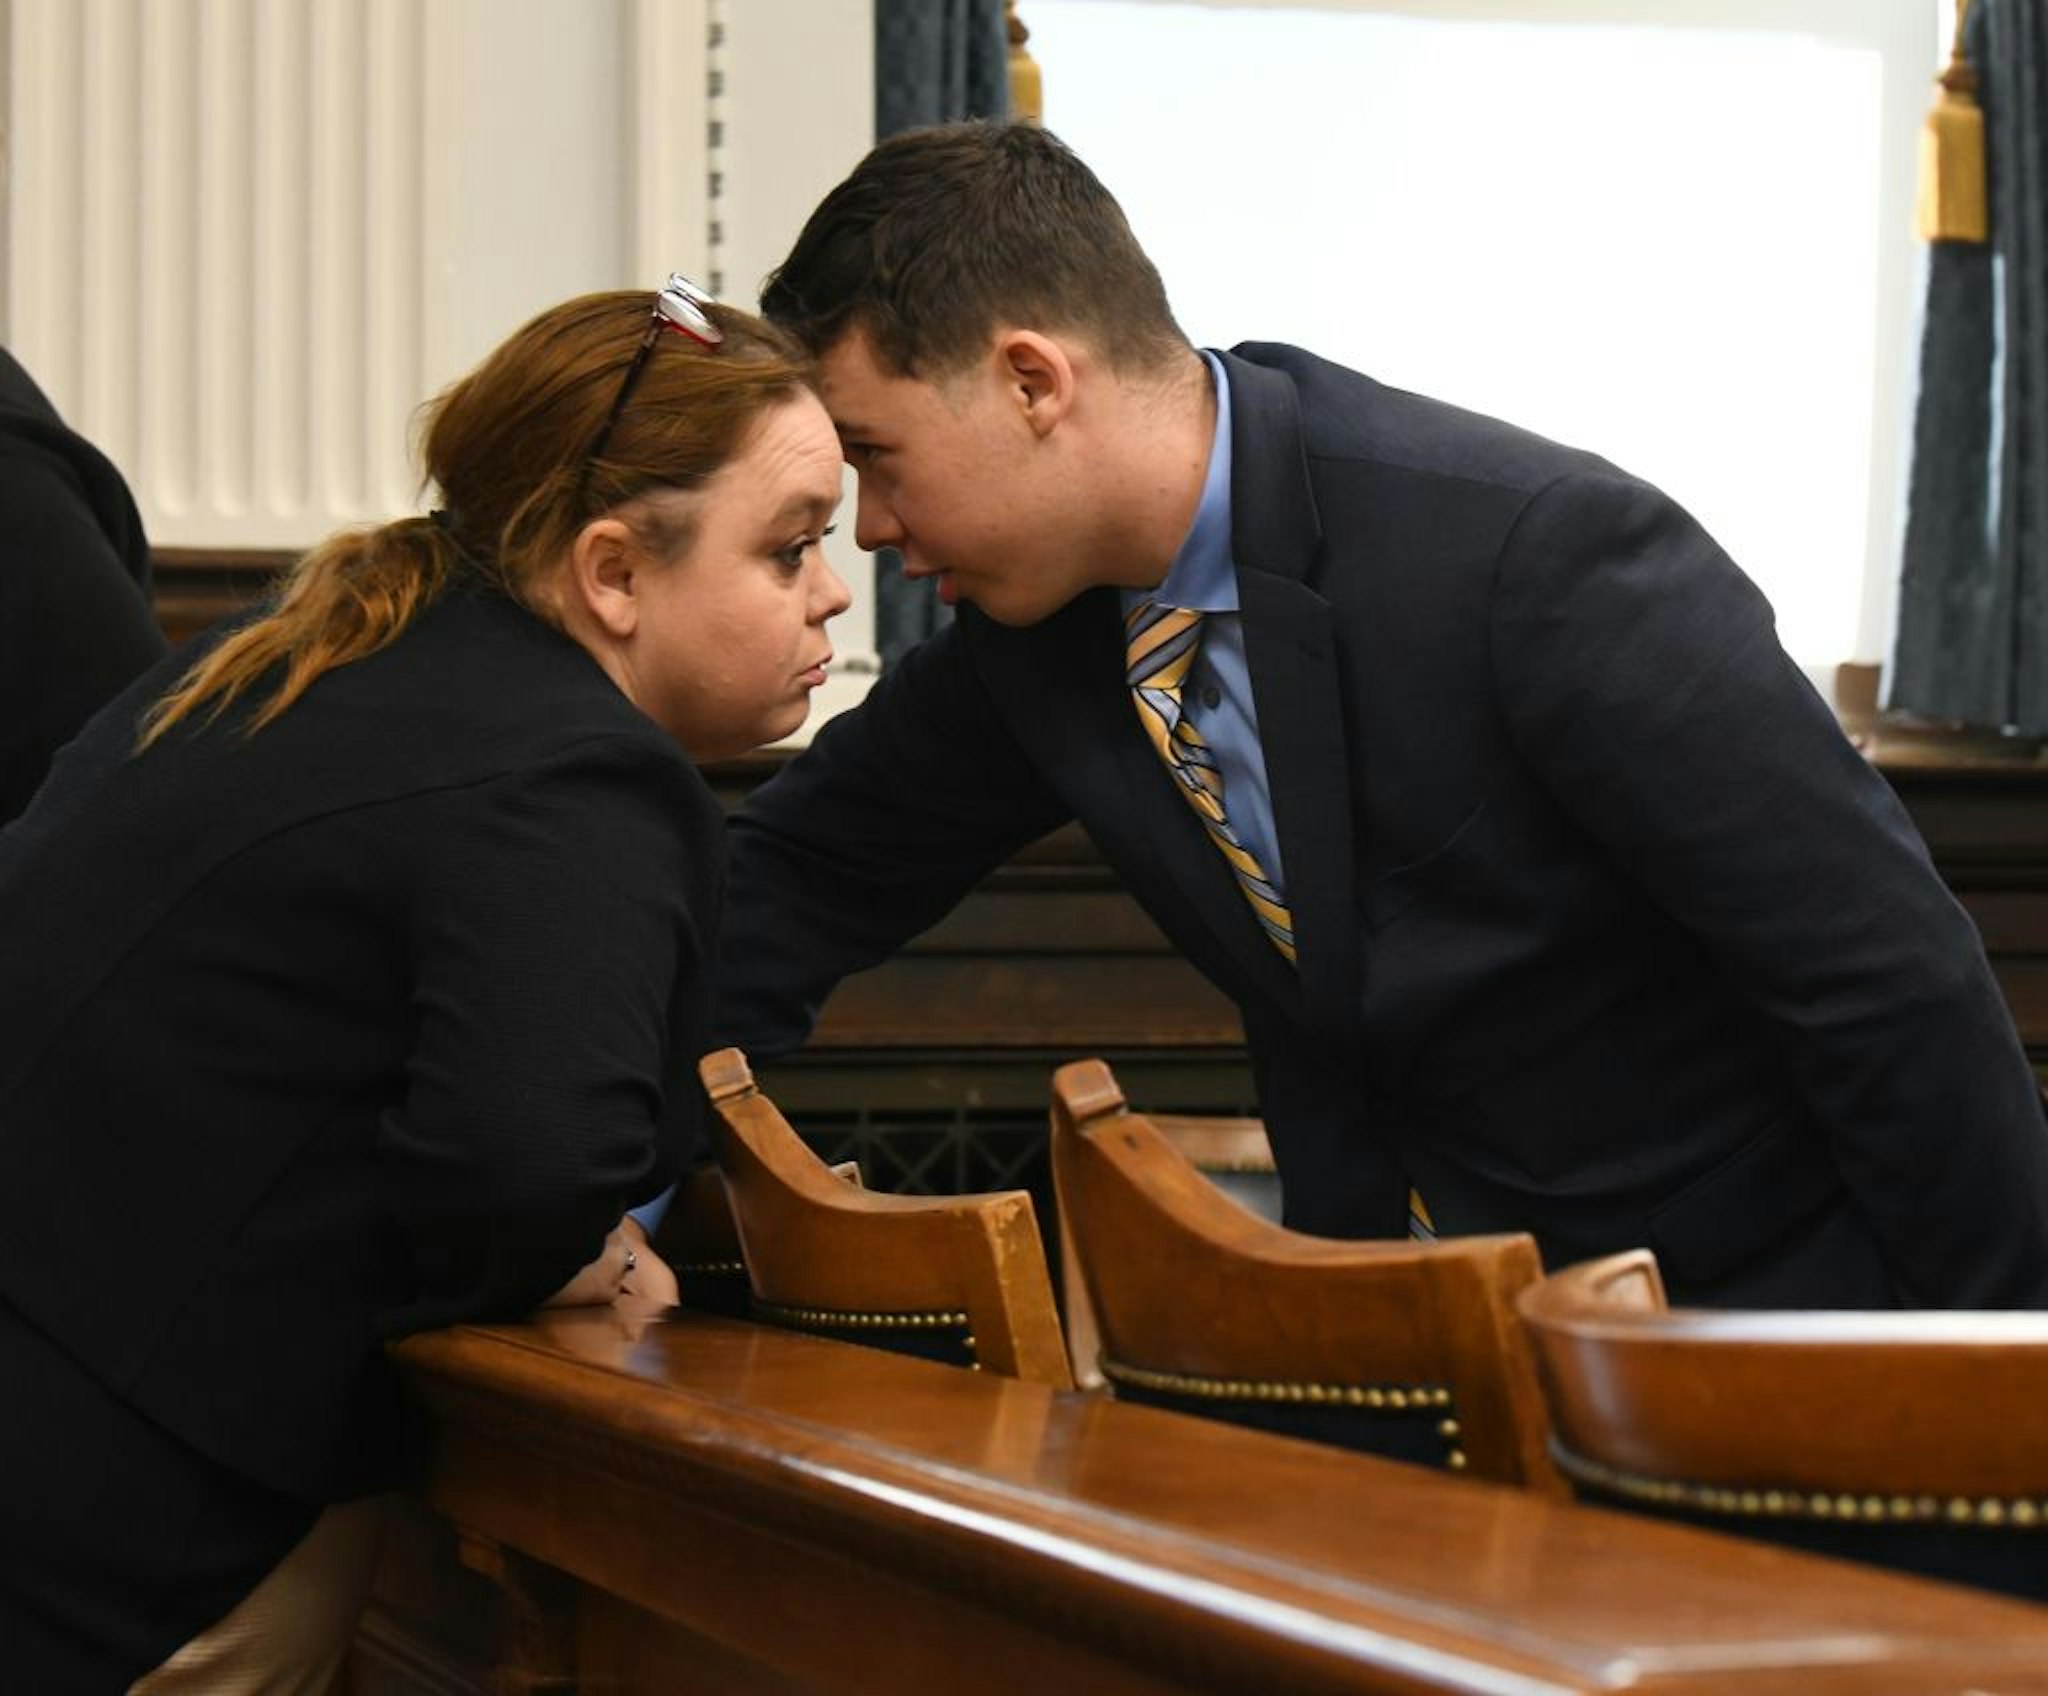 KENOSHA, WISCONSIN - NOVEMBER 03: Kyle Rittenhouse talks to his mother Wendy Rittenhouse during his trial at the Kenosha County Courthouse on November 3, 2021 in Kenosha, Wisconsin. Rittenhouse shot three demonstrators, killing two of them, during a night of unrest that erupted in Kenosha after a police officer shot Jacob Blake seven times in the back while police attempted to arrest him in August 2020. Rittenhouse, from Antioch, Illinois, was 17 at the time of the shooting and armed with an assault rifle. He faces counts of felony homicide and felony attempted homicide. (Photo by Mark Hertzberg-Pool/Getty Images)